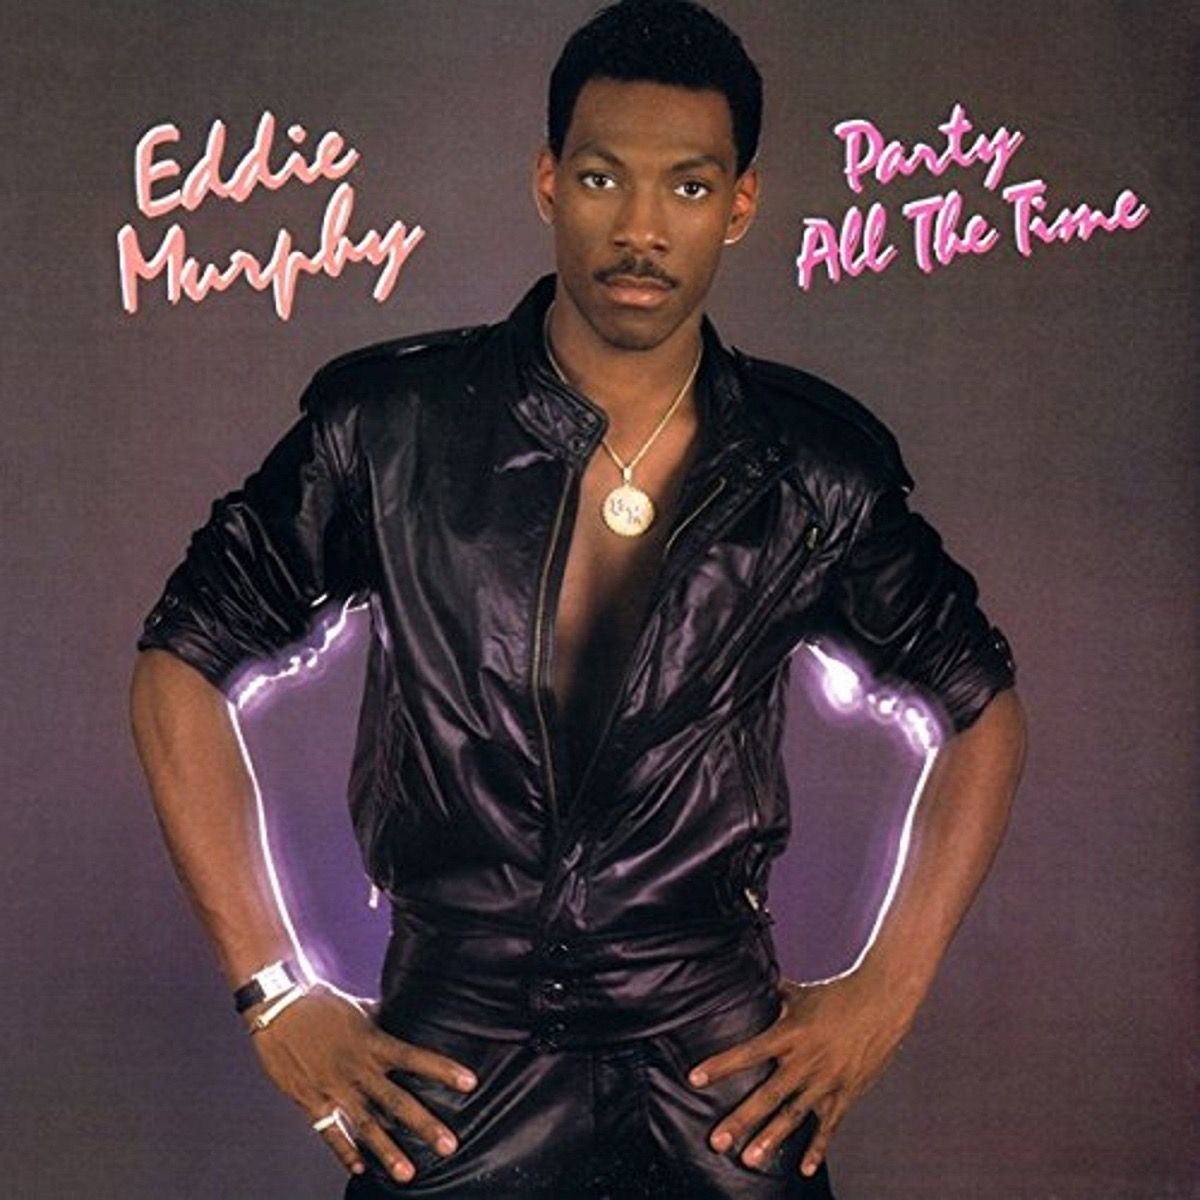 Eddie Murphy Party All the Time albumomslag